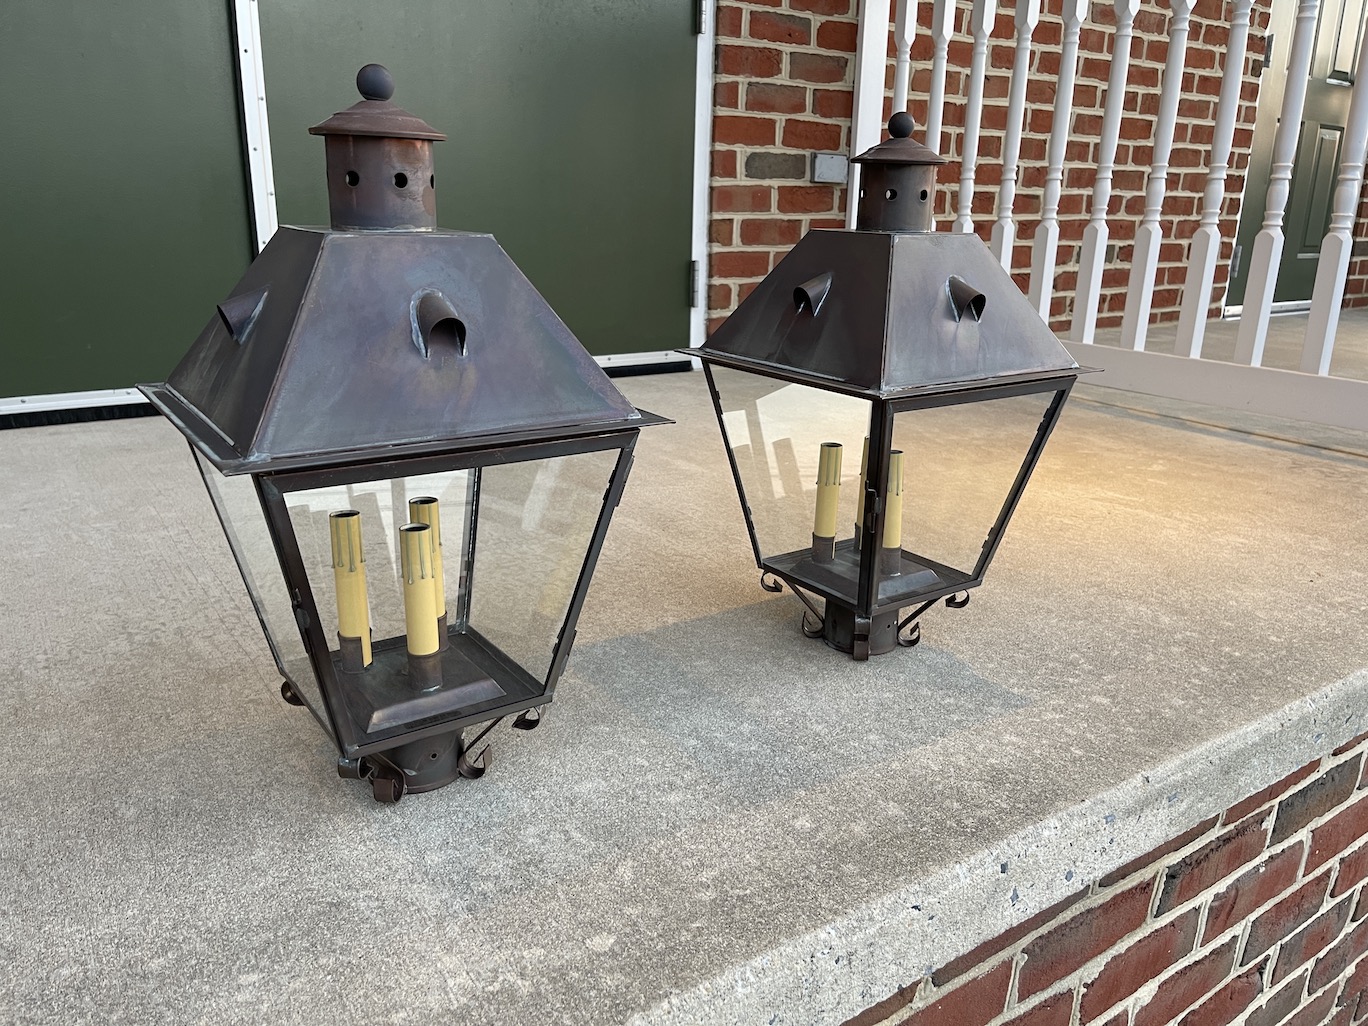 Pair of Perry County Post Lights - Outdoor Lighting Image